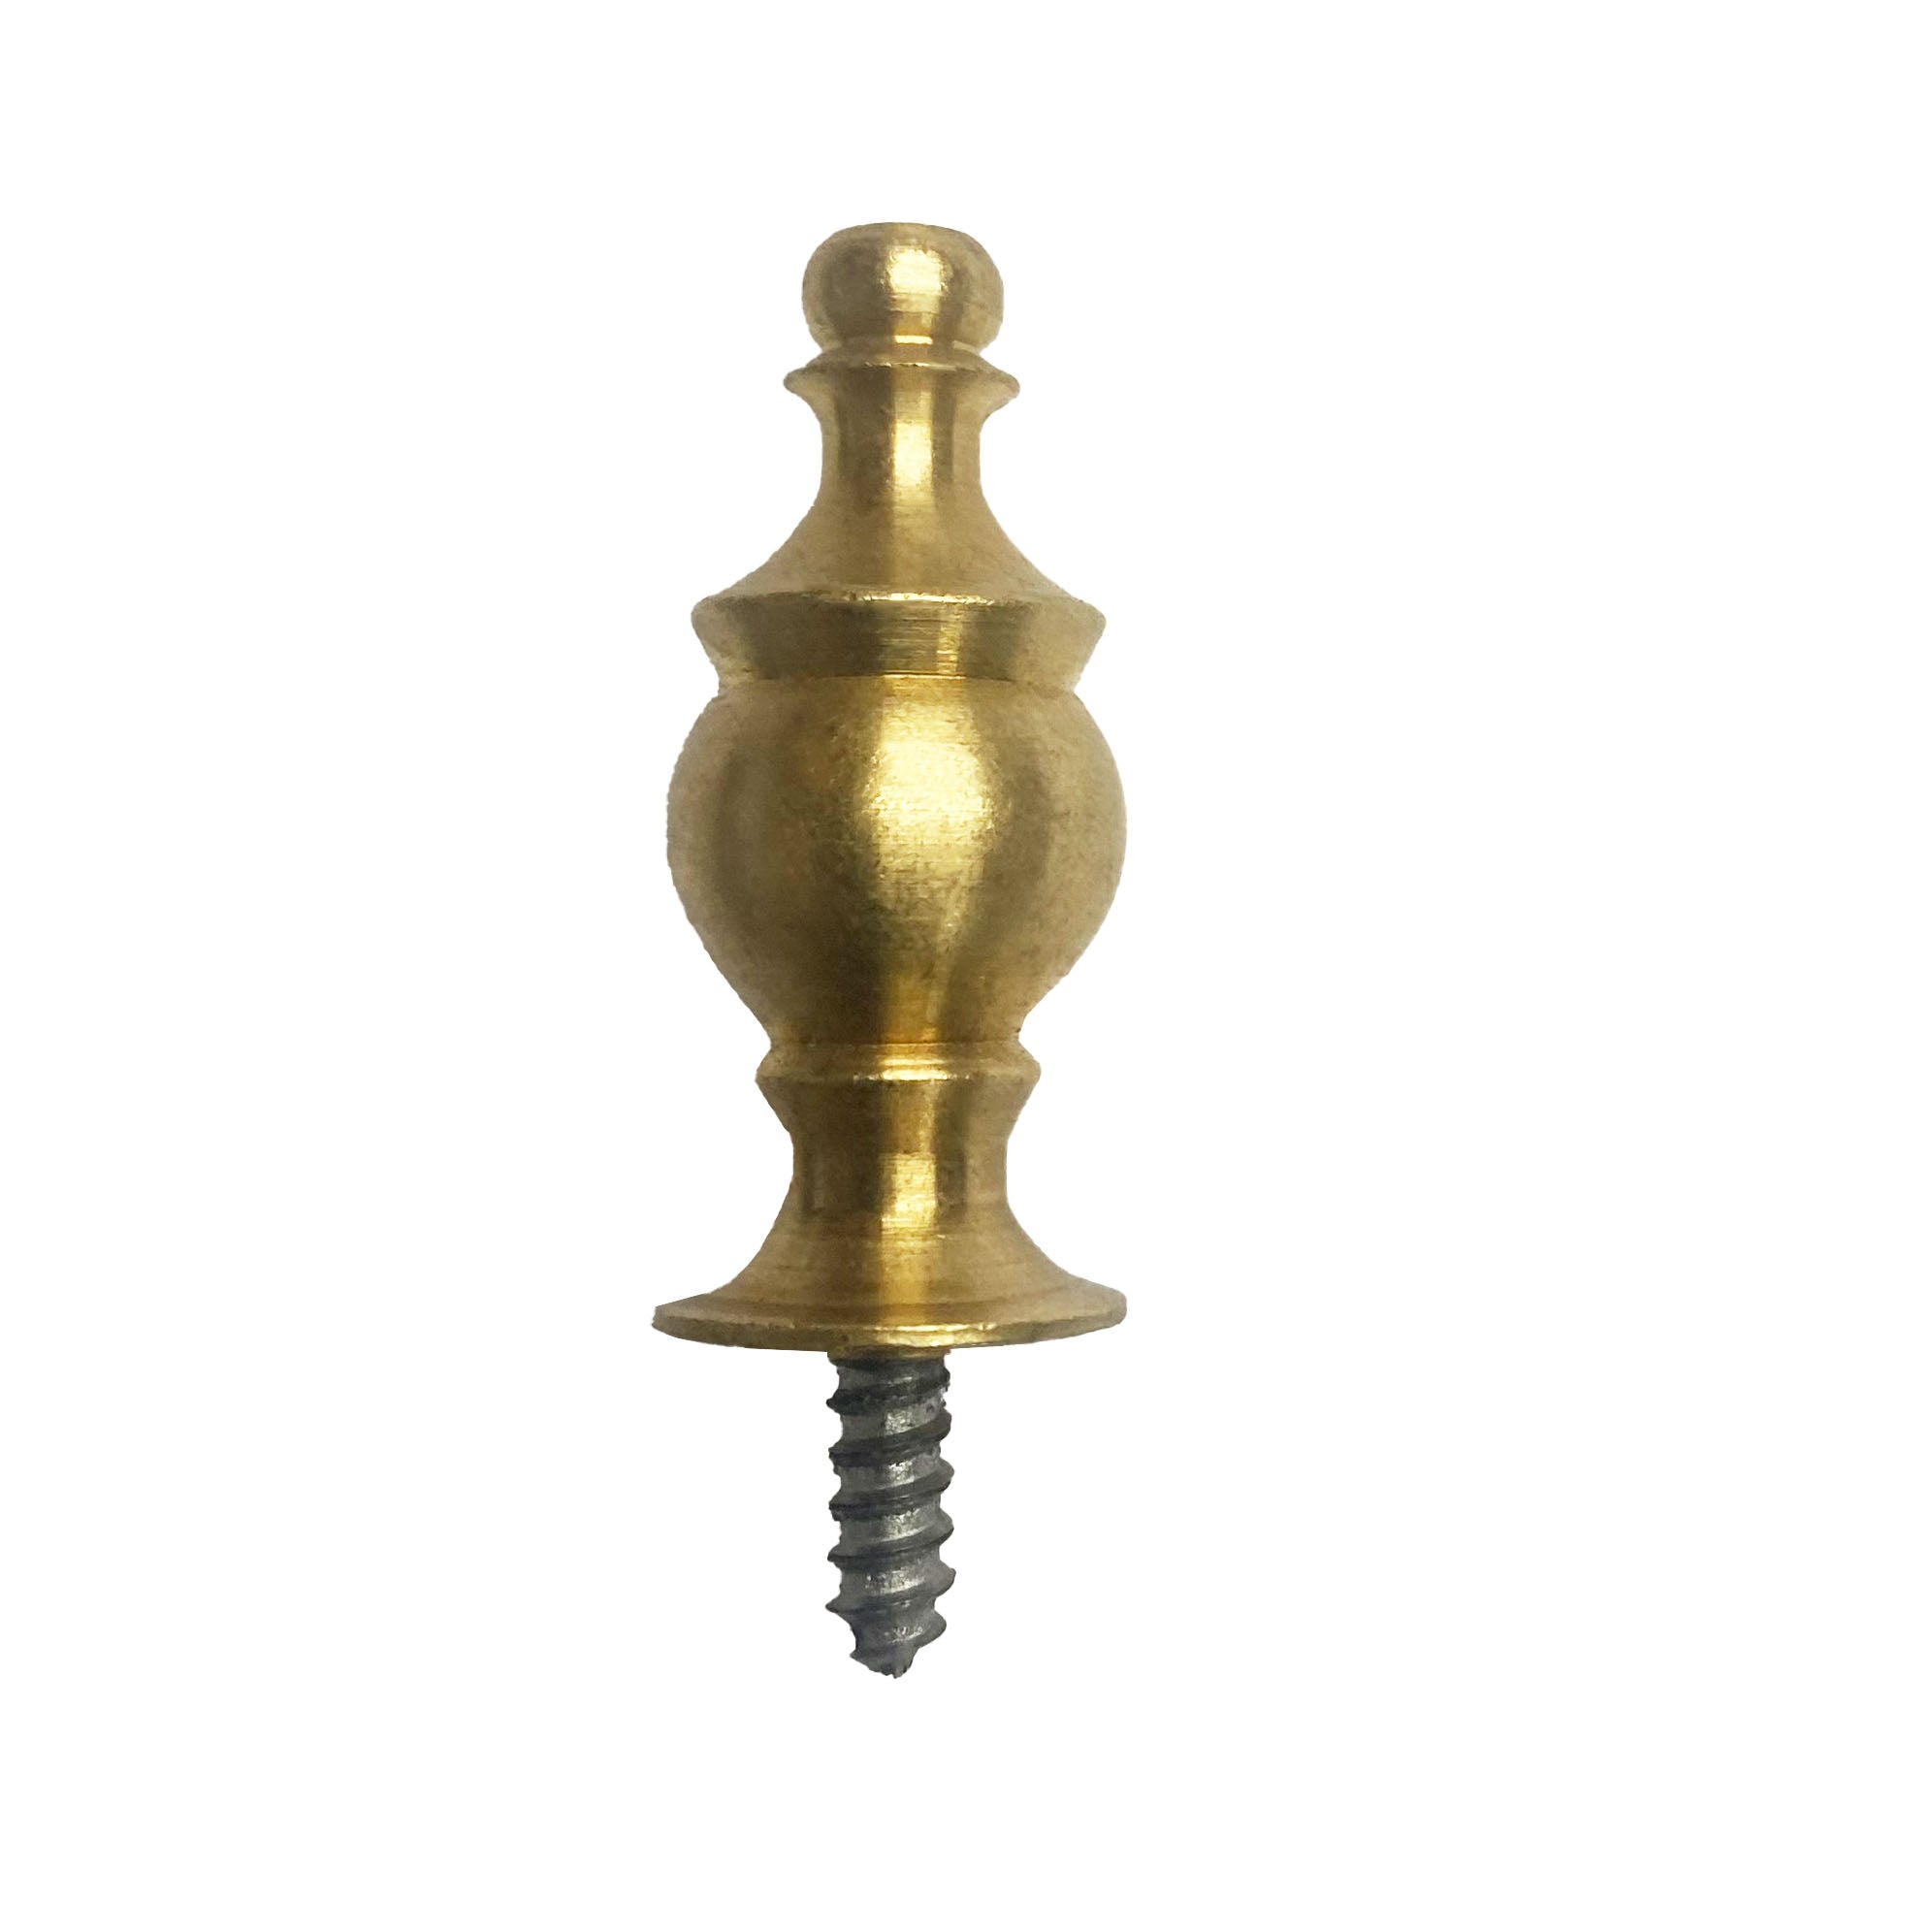 Finial or Foot, Brass Screw-on Crown - Paxton Hardware